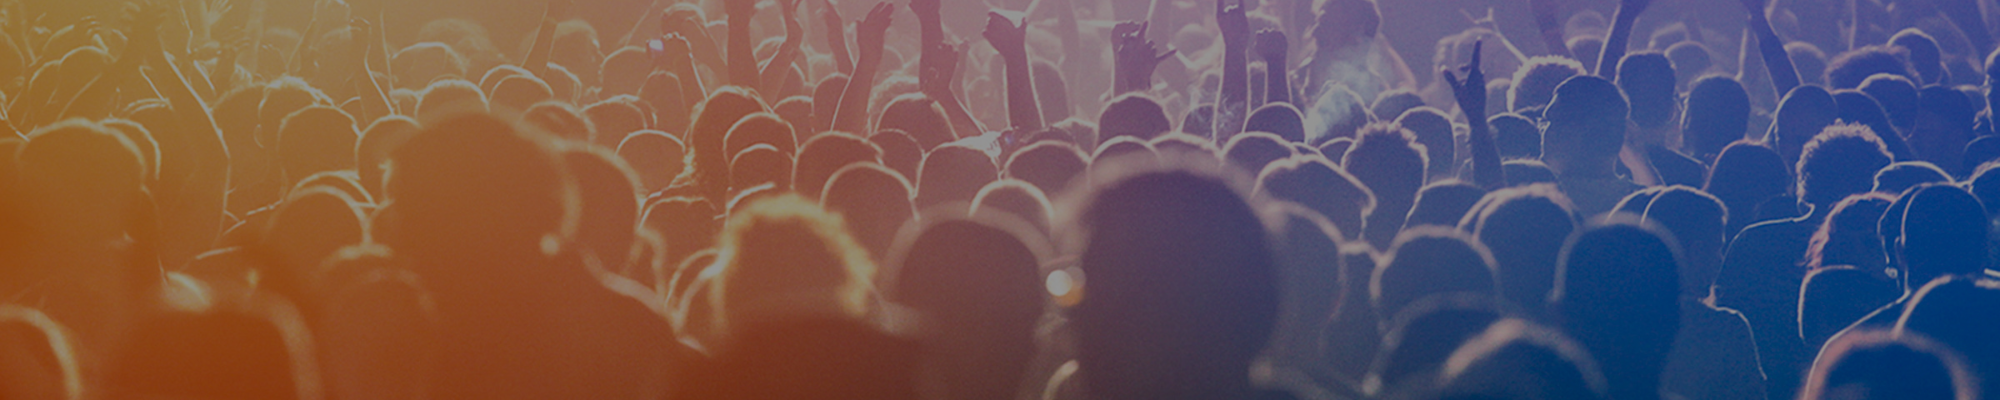 Image of people in a concert setting.